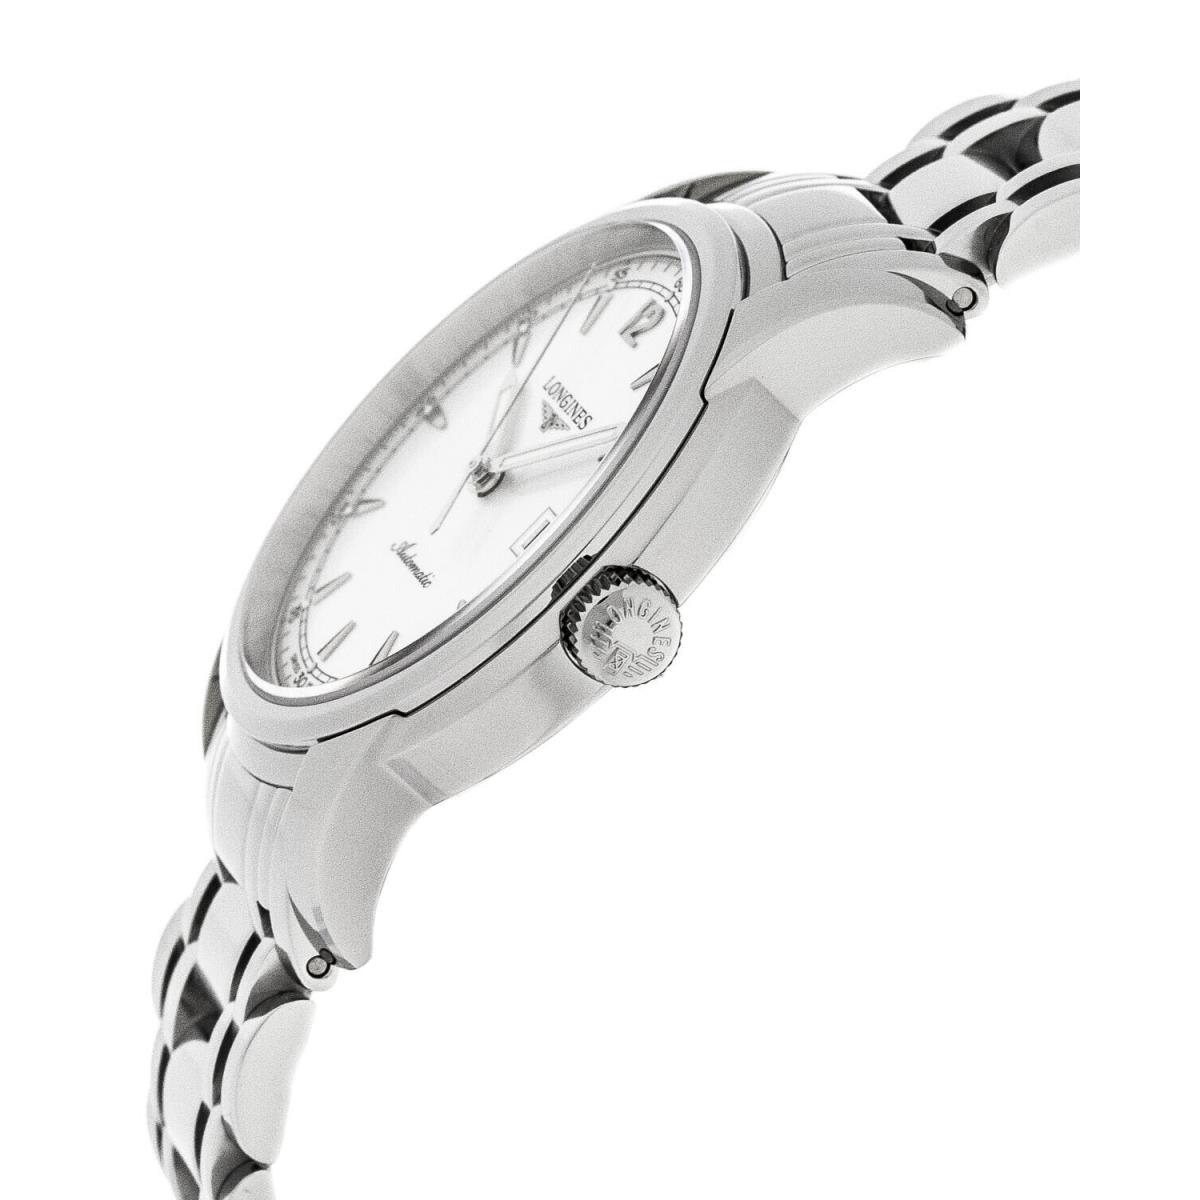 Longines watch Saint Imier Collection - Silver Dial, Silver Band